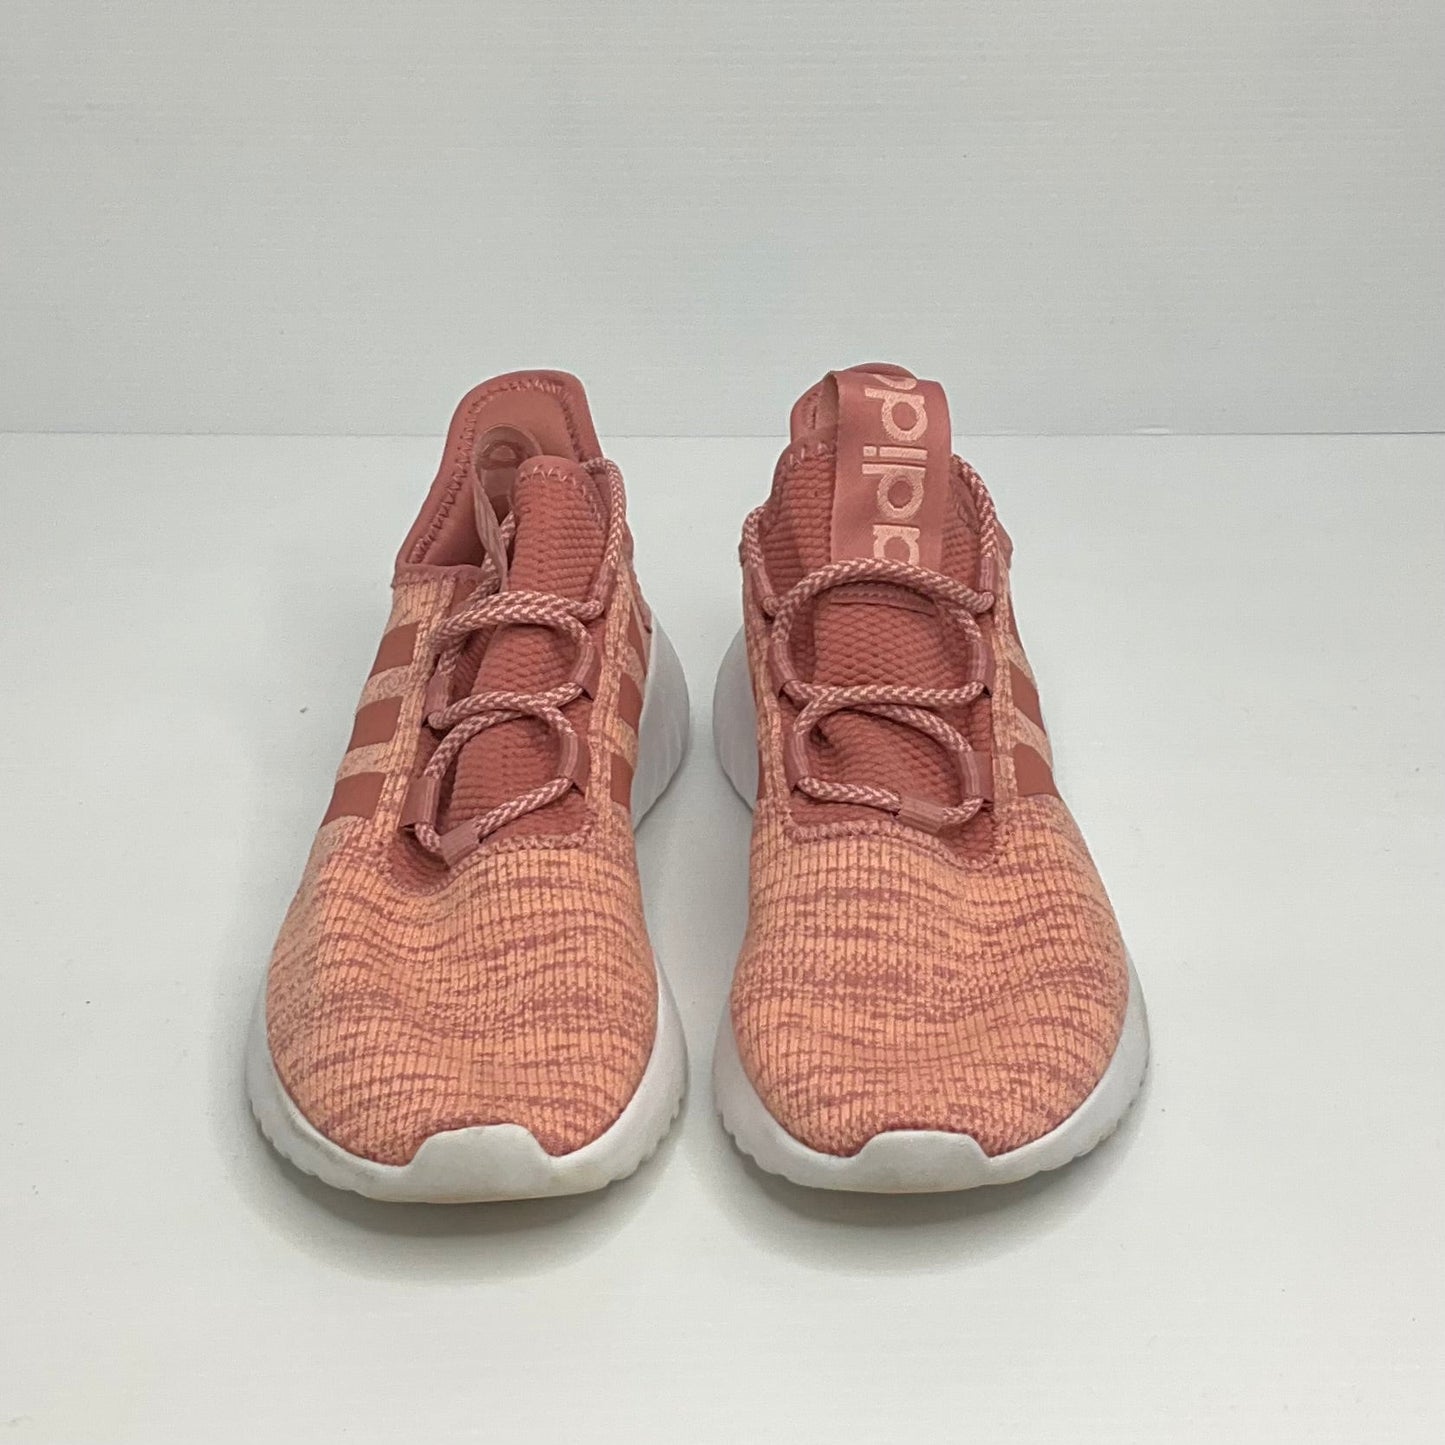 Pink Shoes Athletic Adidas, Size 9.5